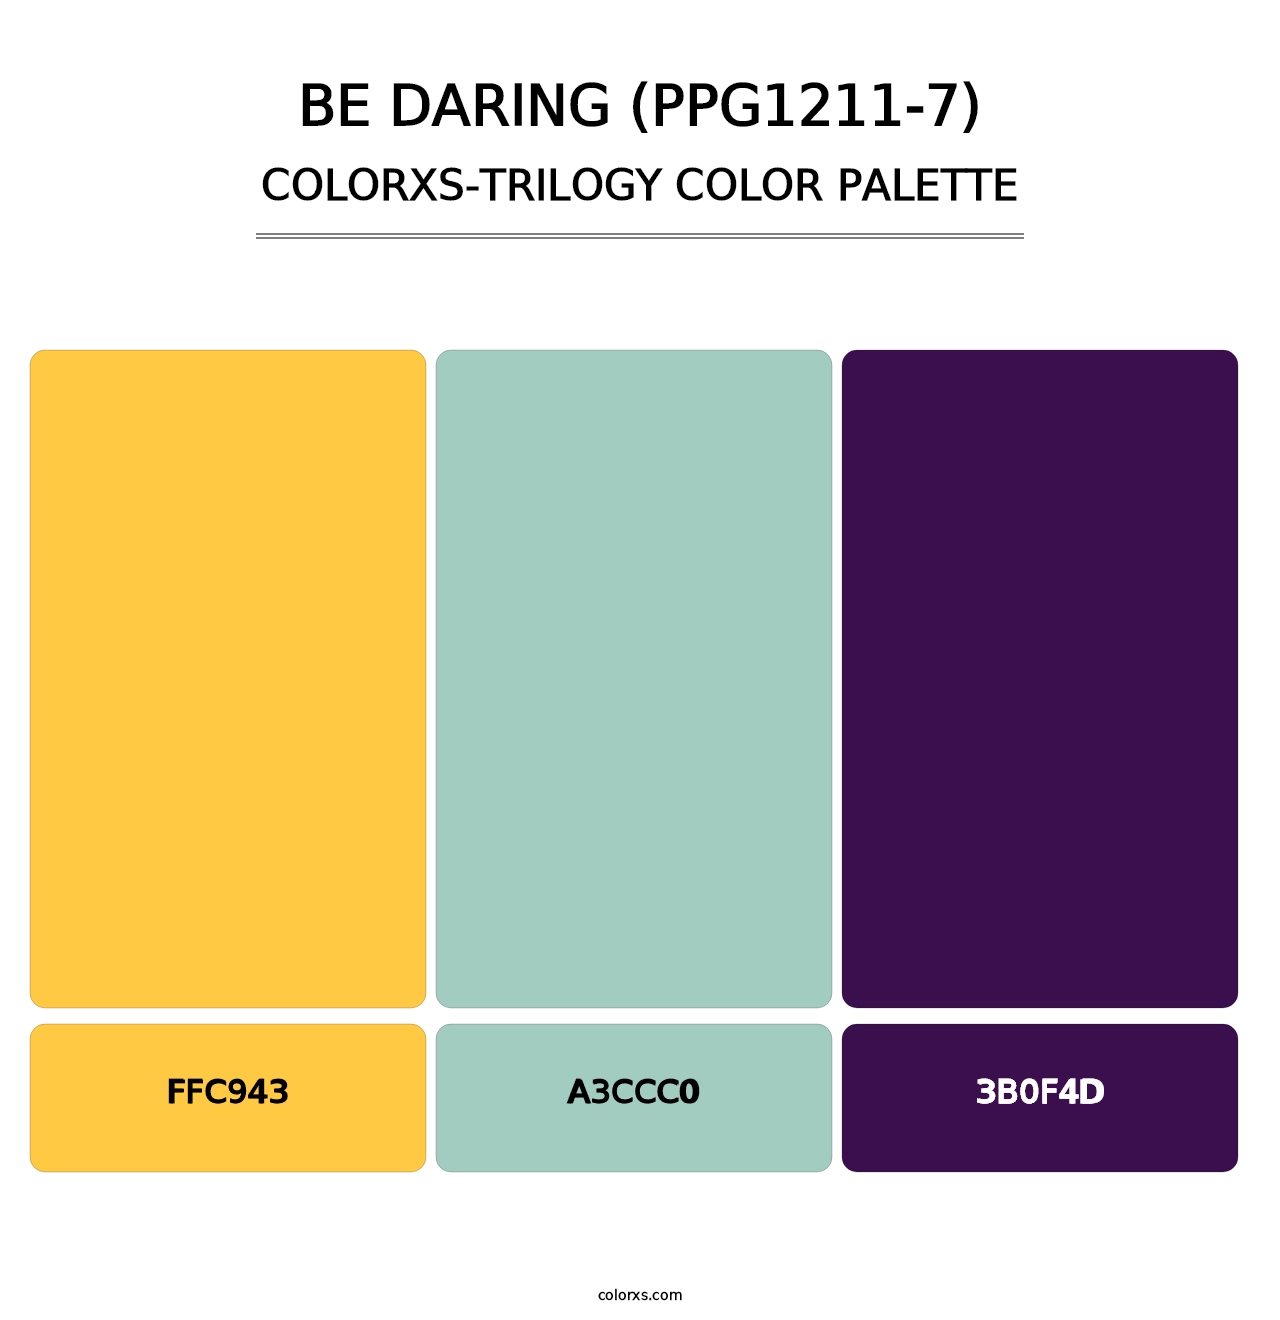 Be Daring (PPG1211-7) - Colorxs Trilogy Palette